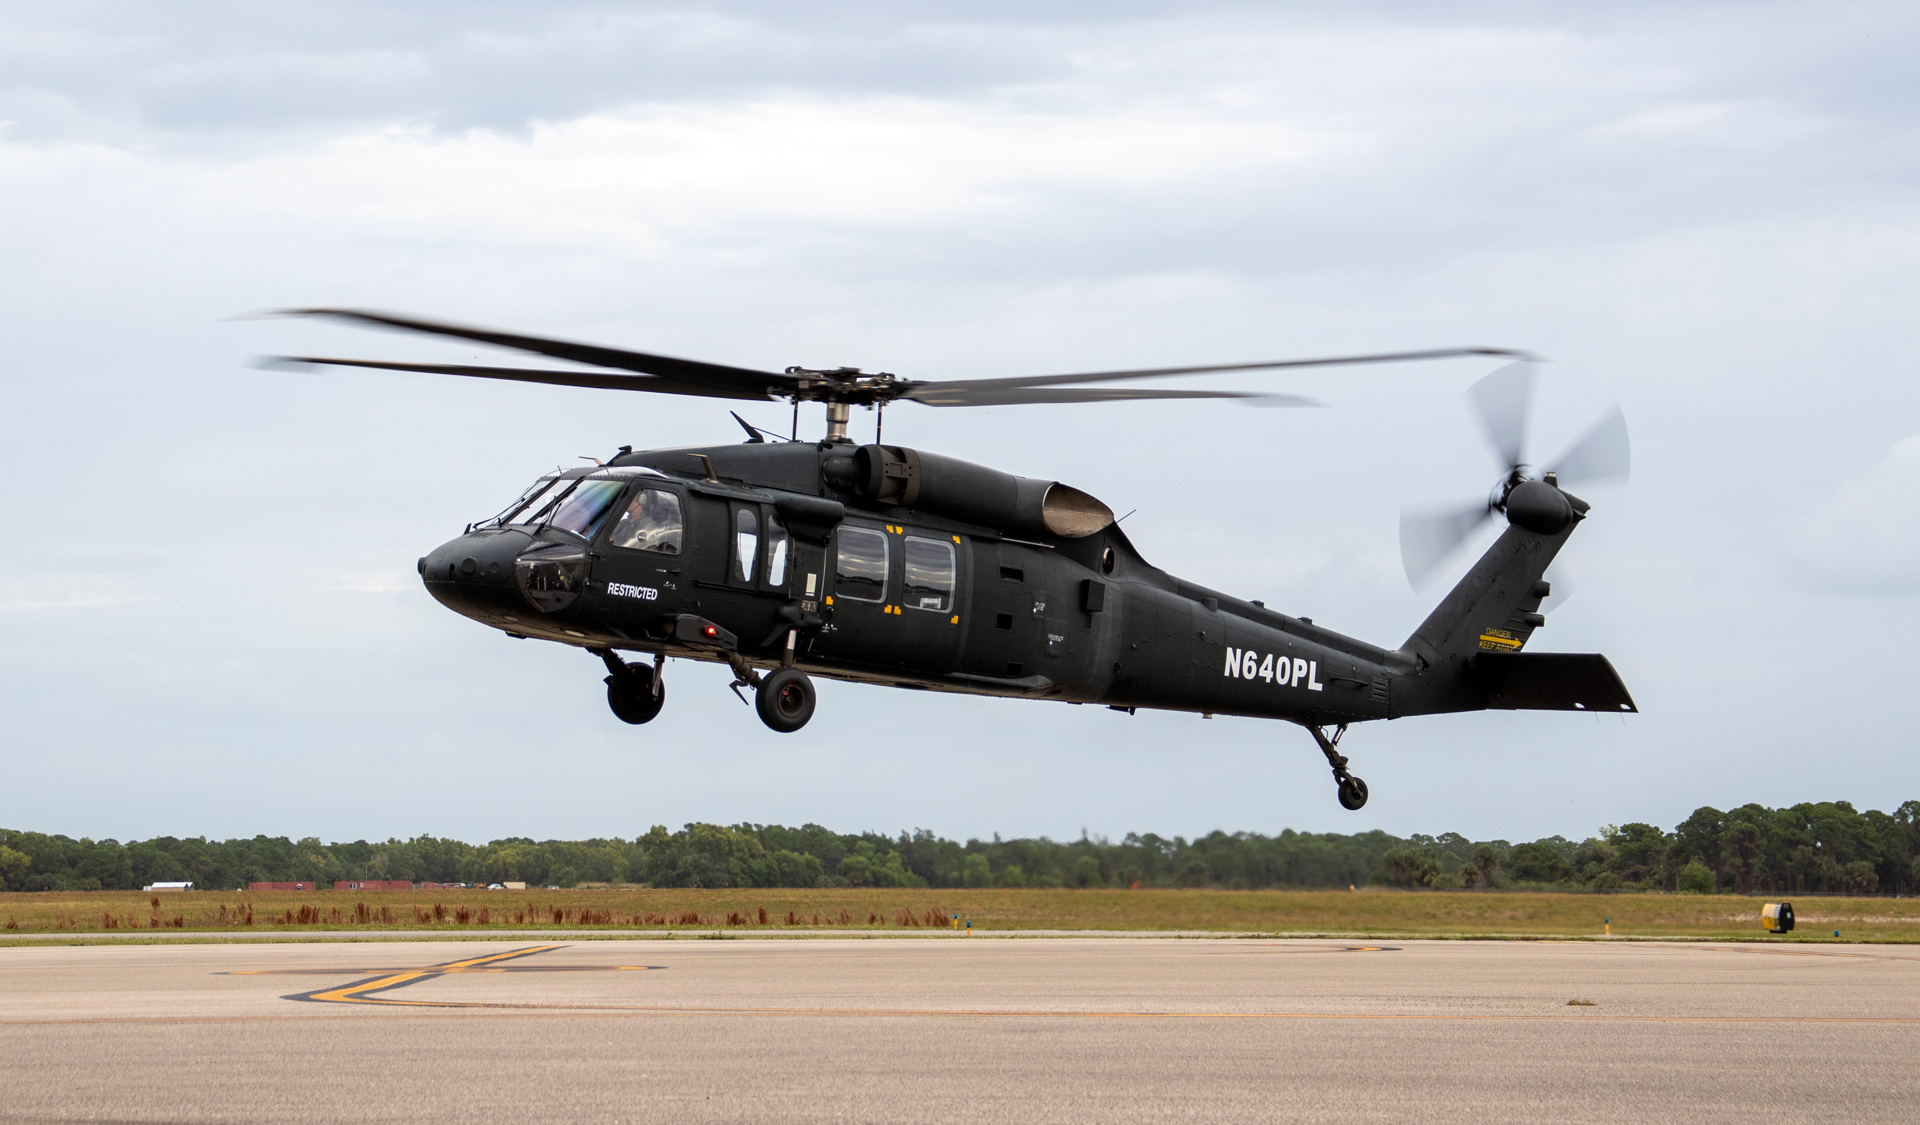 The first-of-type S-70M Black Hawk helicopter departs from the Sikorsky Training Academy in Florida Nov. 18 having received the FAA’s Certificate of Airworthiness.